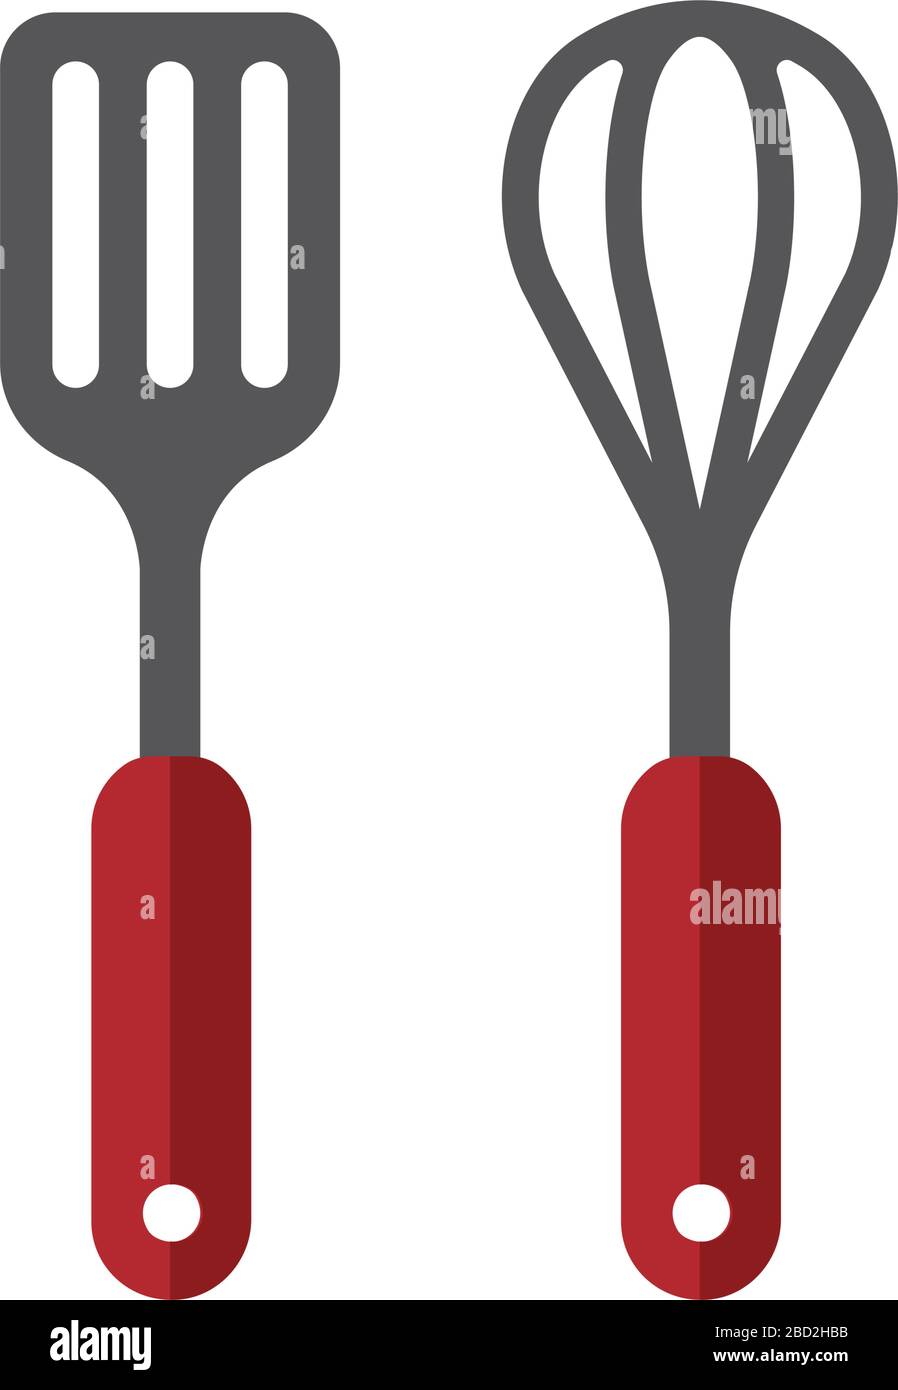 Drawing Kitchen Utensils Images – Browse 404,123 Stock Photos